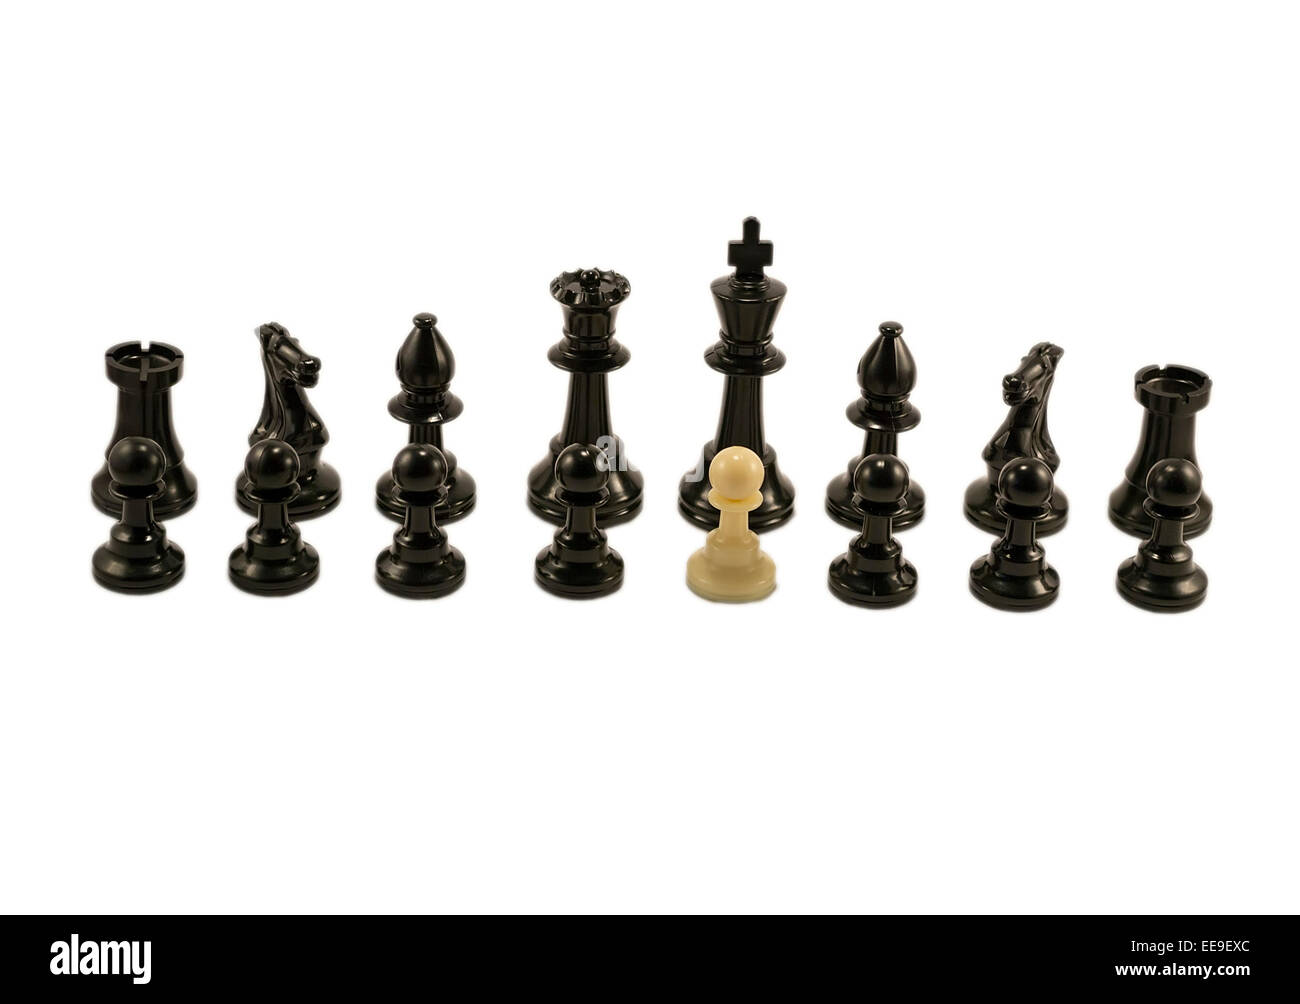 White pawn standing alongside the chess black pieces Stock Photo